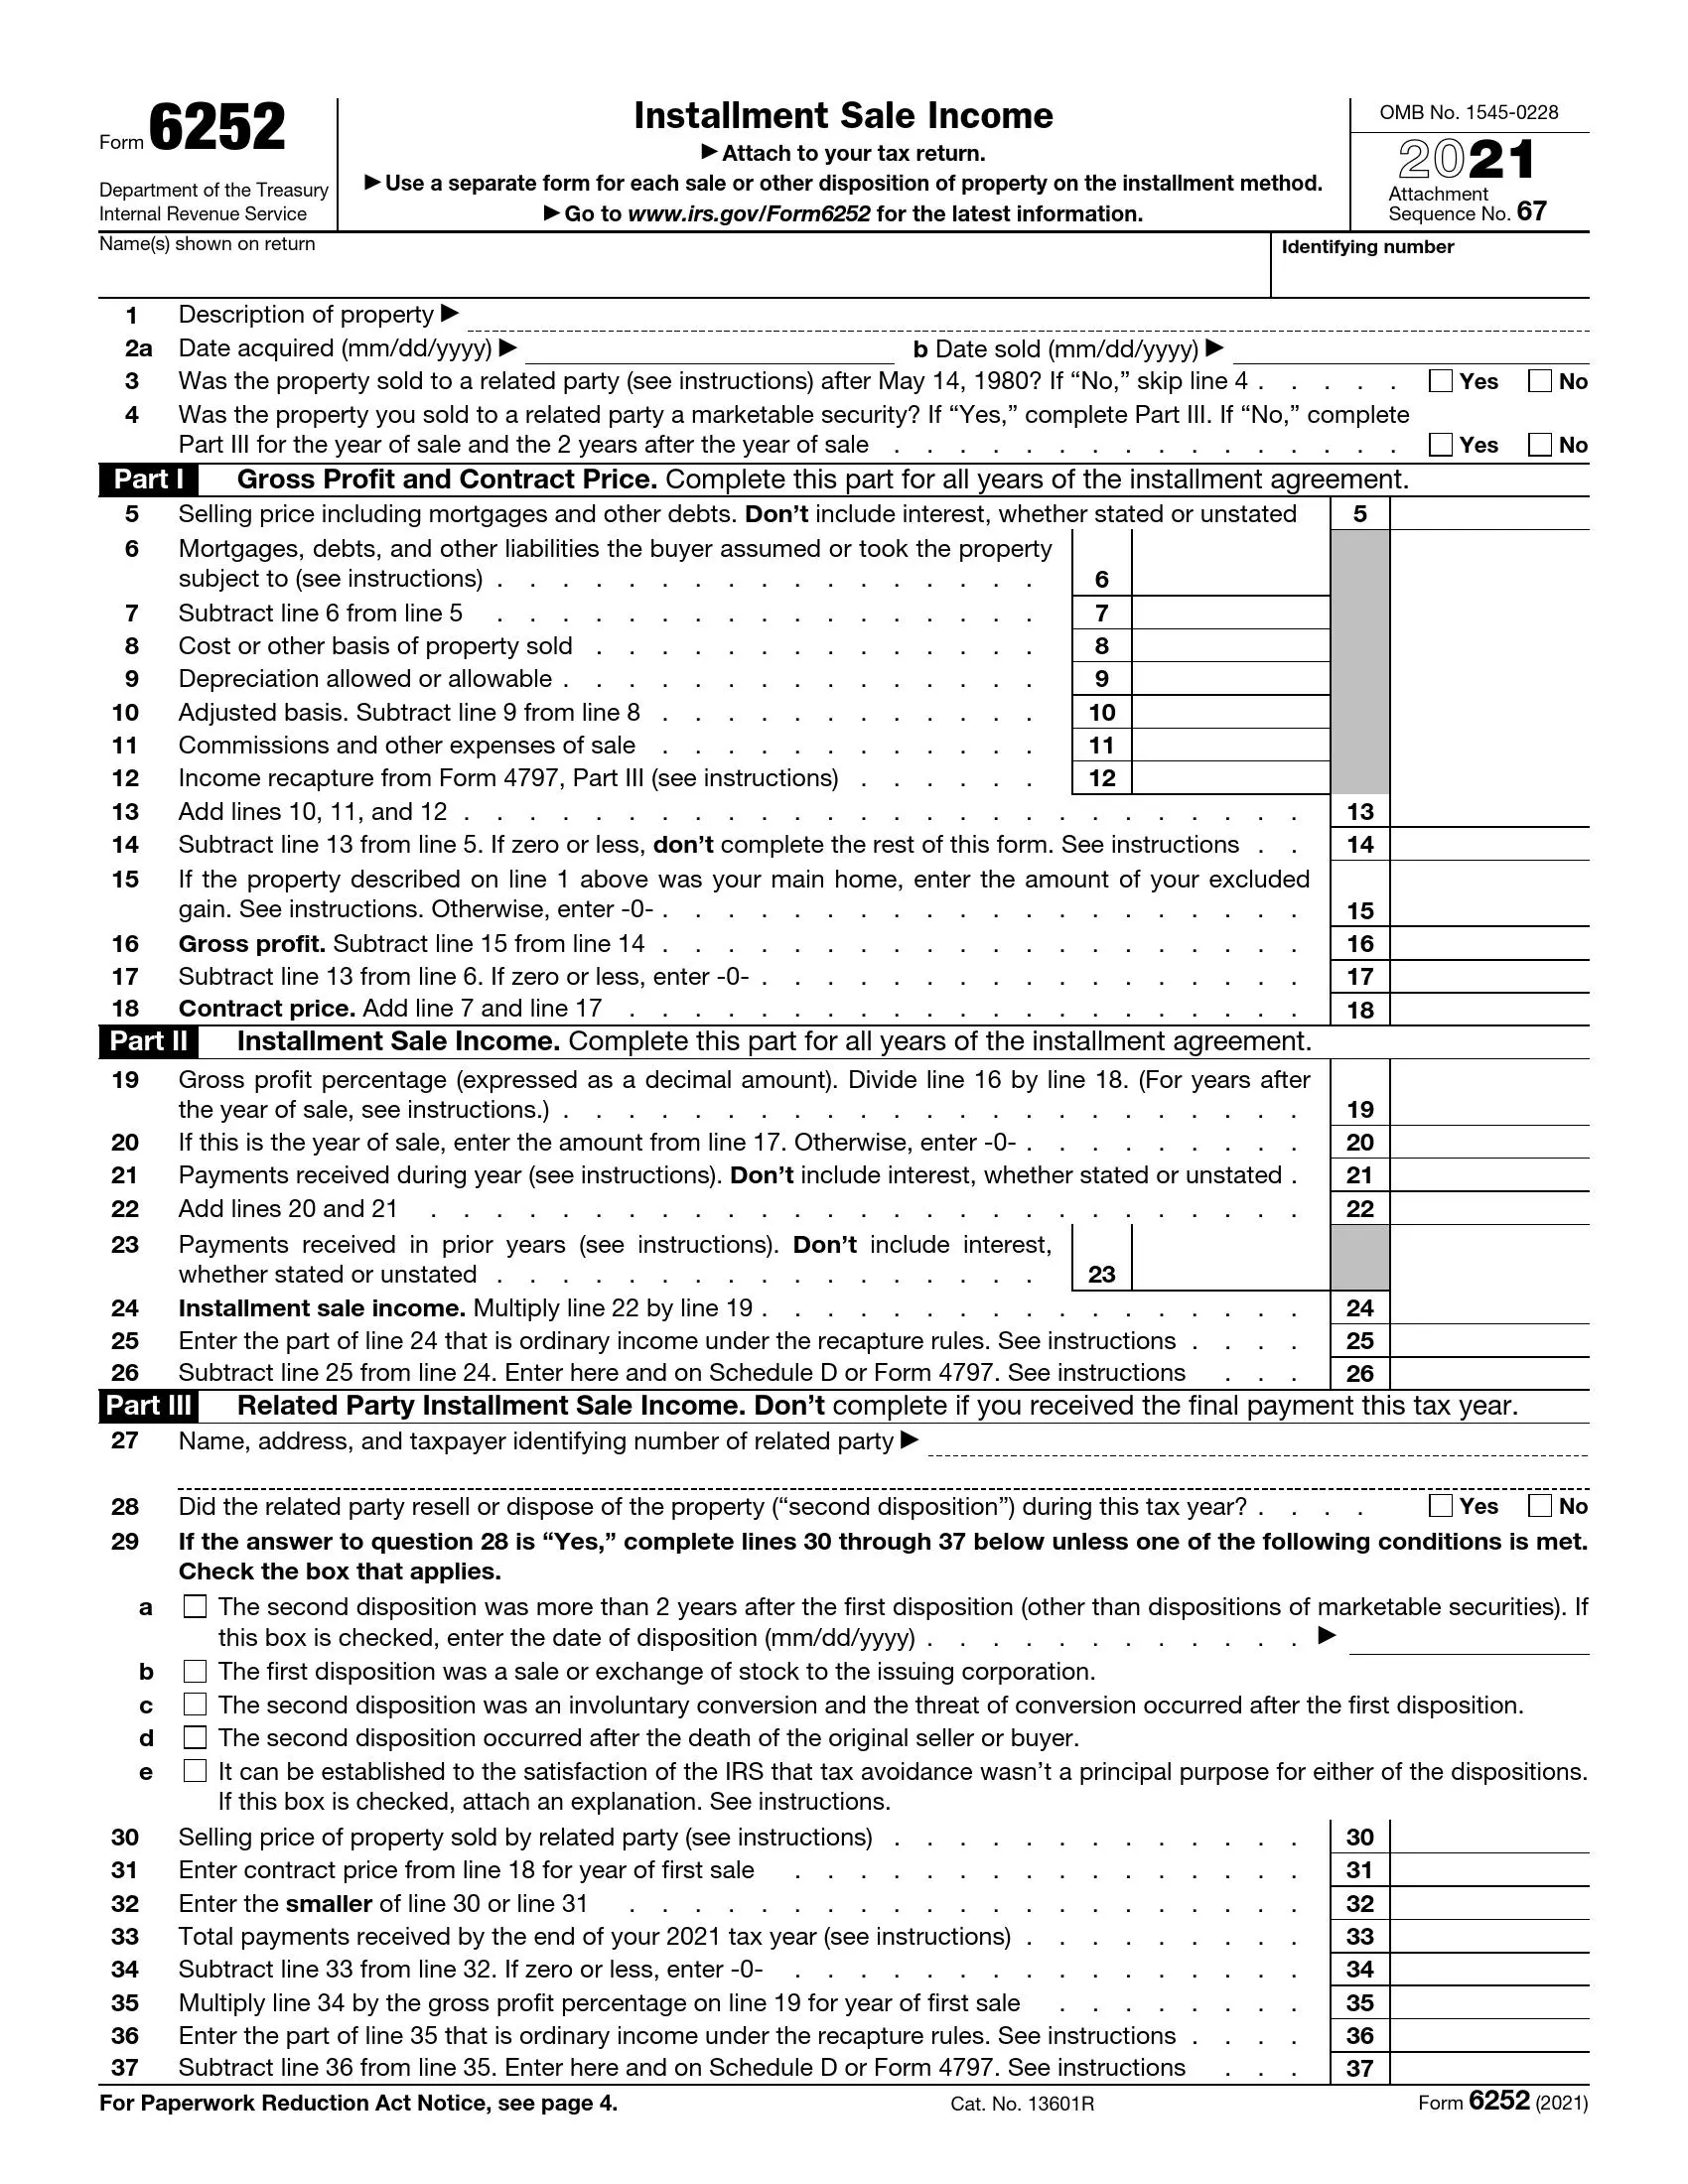 irs form 6252 2021 preview